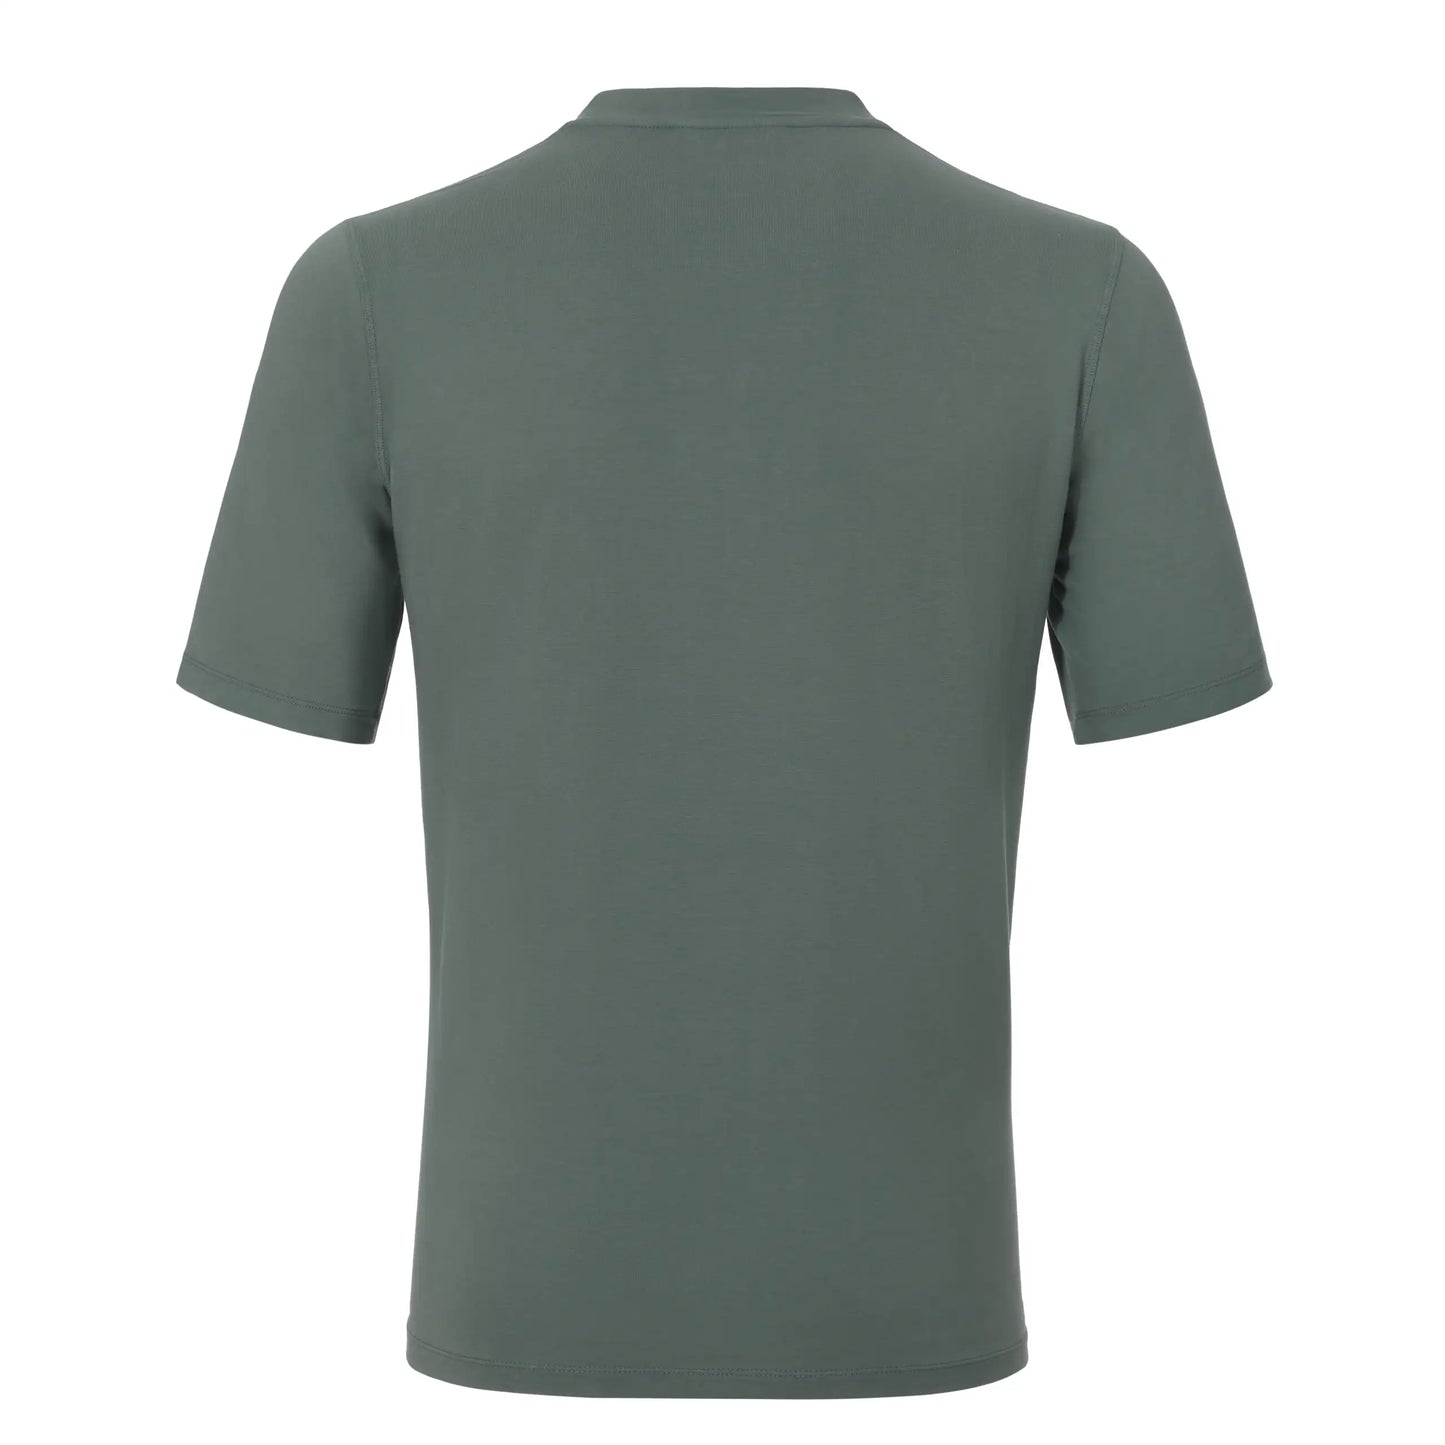 Stretch-Cotton T-Shirt in Military Green